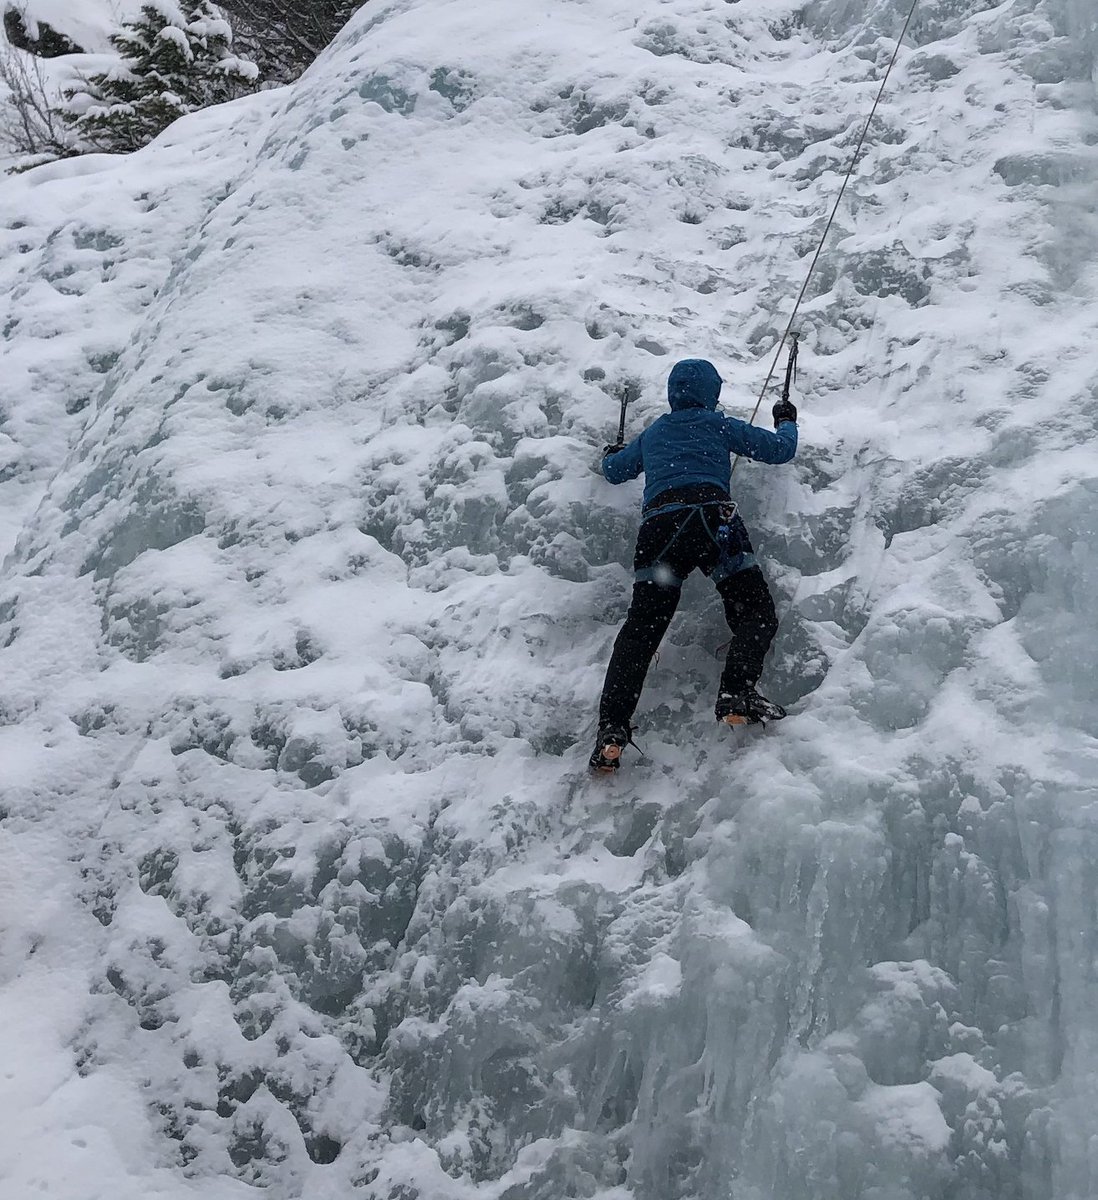 #OpenNotes director Dr. Cait DesRoches was quoted in the @AP on how new #AI tools are being used in clinical documentation. Here's the link to the full article. Alternatively, here's a photo of Cait climbing a mountain of ice! #opennotes apnews.com/article/chatgp…